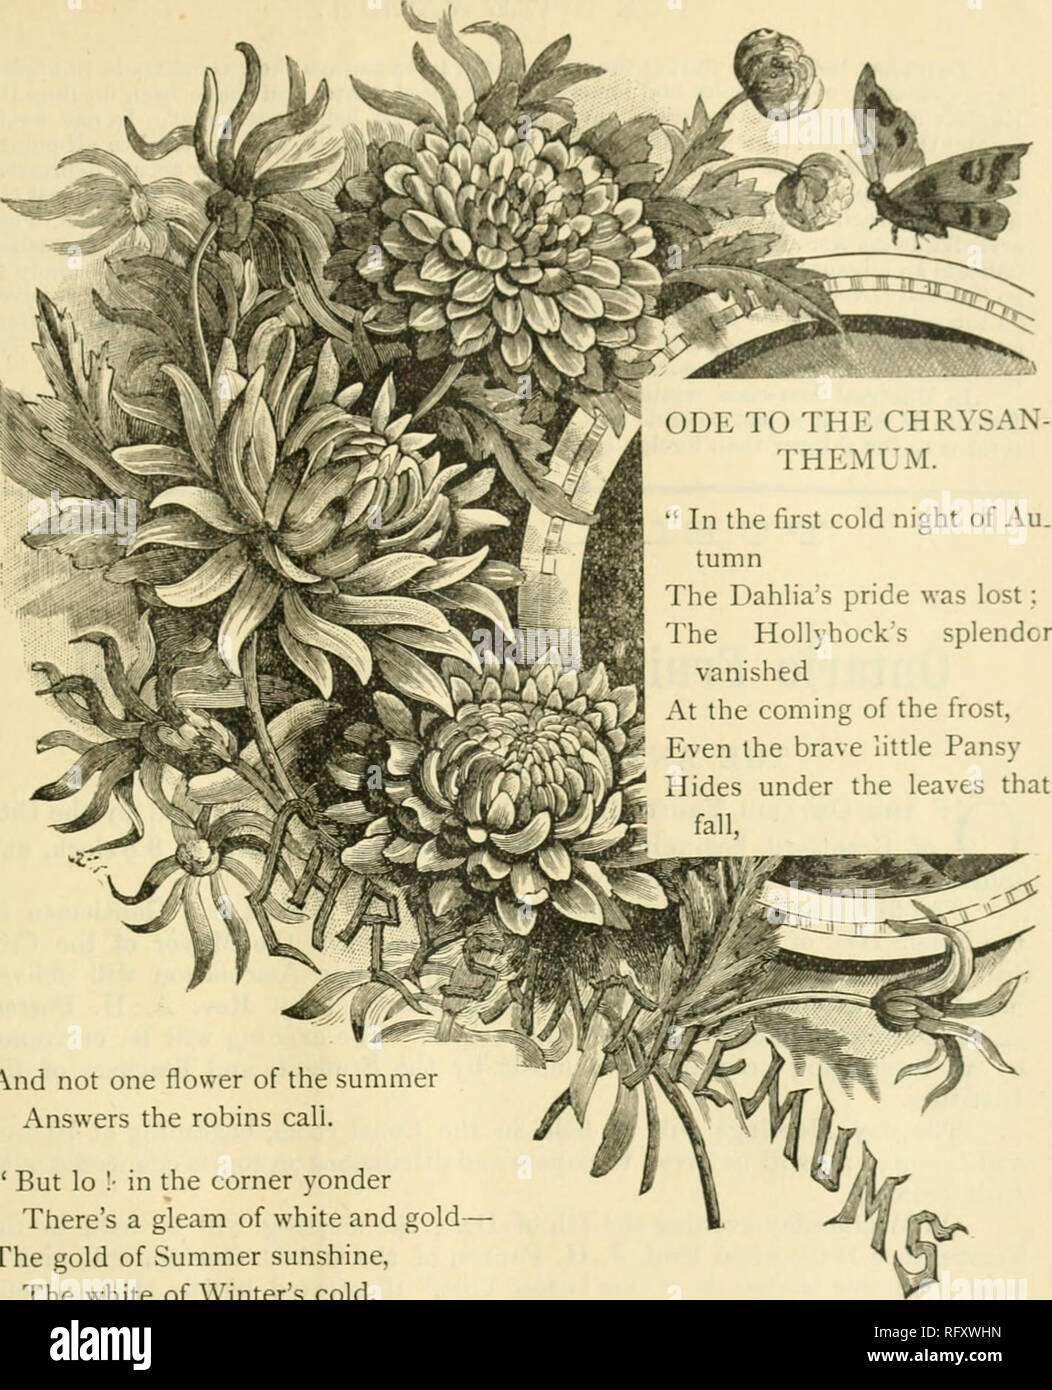 . The Canadian horticulturist [monthly], 1892. Gardening; Canadian periodicals. And not one flower of the summer Answers the robins call. &quot; But lo I- in the corner yonder There's a gleam of white and gold— The gold of Summer sunshine, The white of Winter's cold. And, laden with spicy odors, The Autumn breezes come From the nooks and corners brightened By the brave Chrysanthemum. &quot; Hail to thee I beautiful flower. With royal and dauntless mien Facing the frosts of Winter— I crown thee Autumn's queen. With your gleam of late sweet sunshine You brighten the closing year. And keep us thi Stock Photo